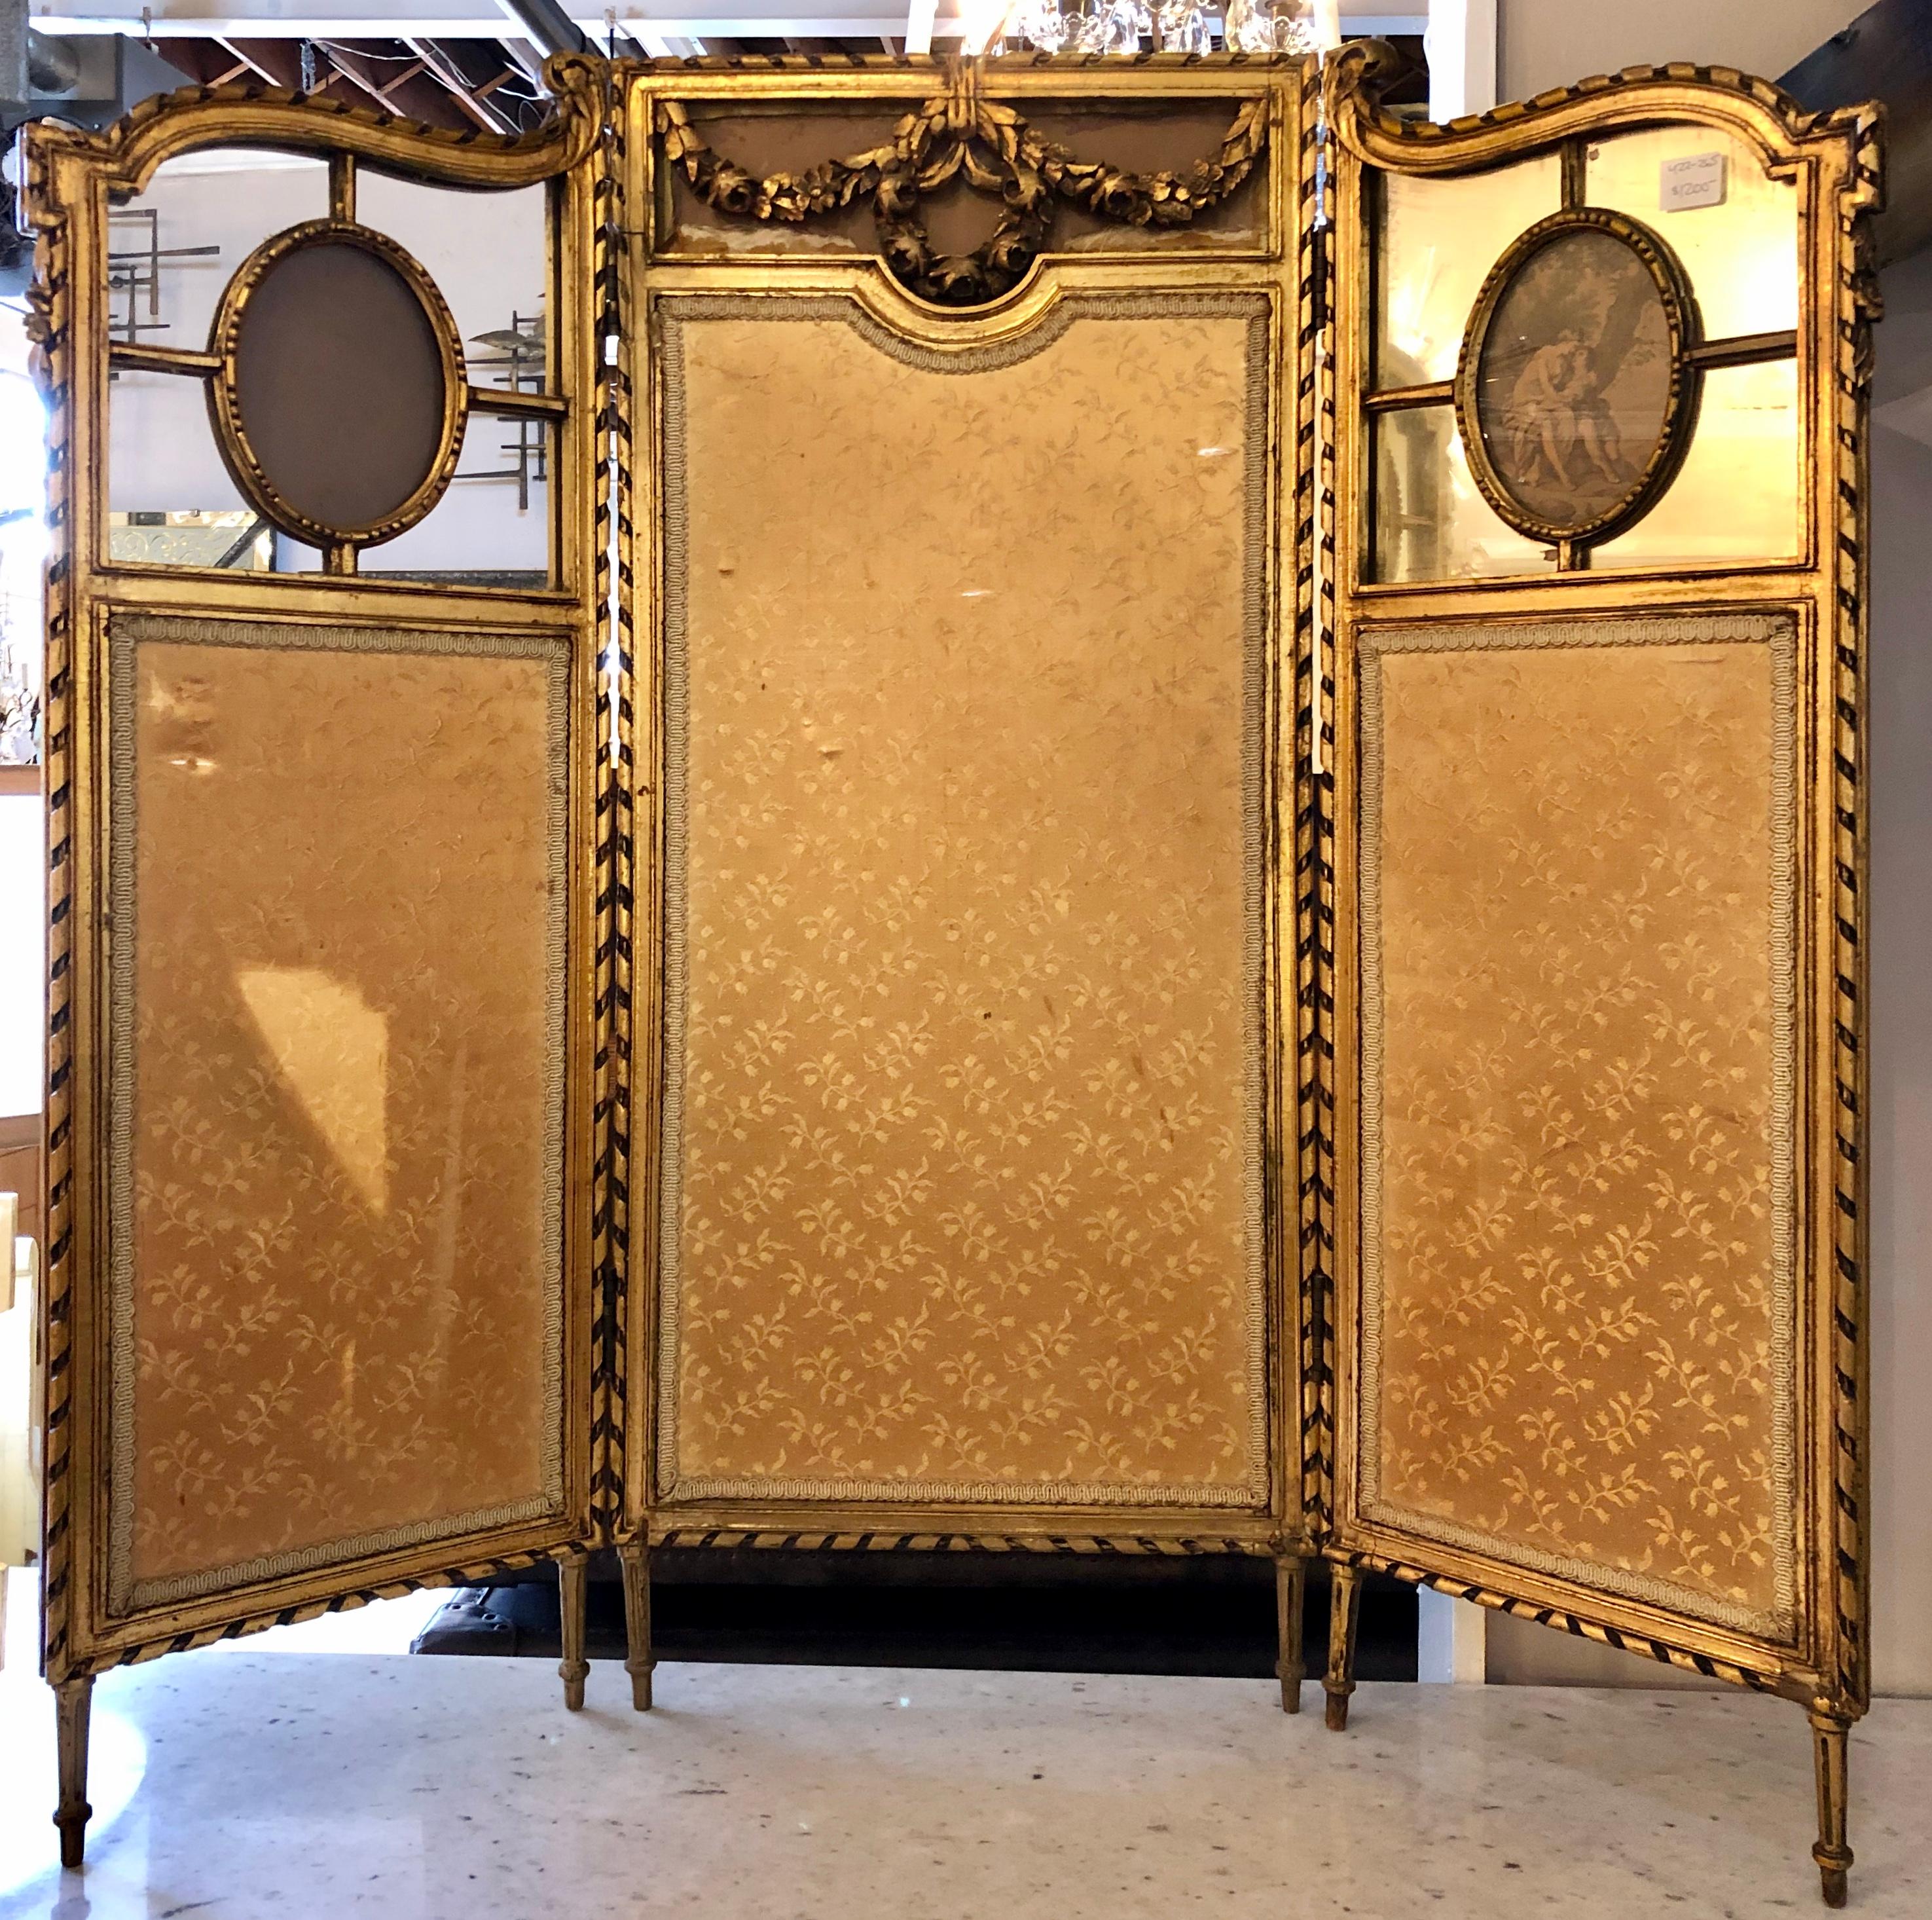 19th century Louis XVI style fire / dressing screen or room divider. This finely carved giltwood room divider or dressing screen has three panels. The center, larger, panel having a fine fabric framed in a carved wood design terminating with laurel